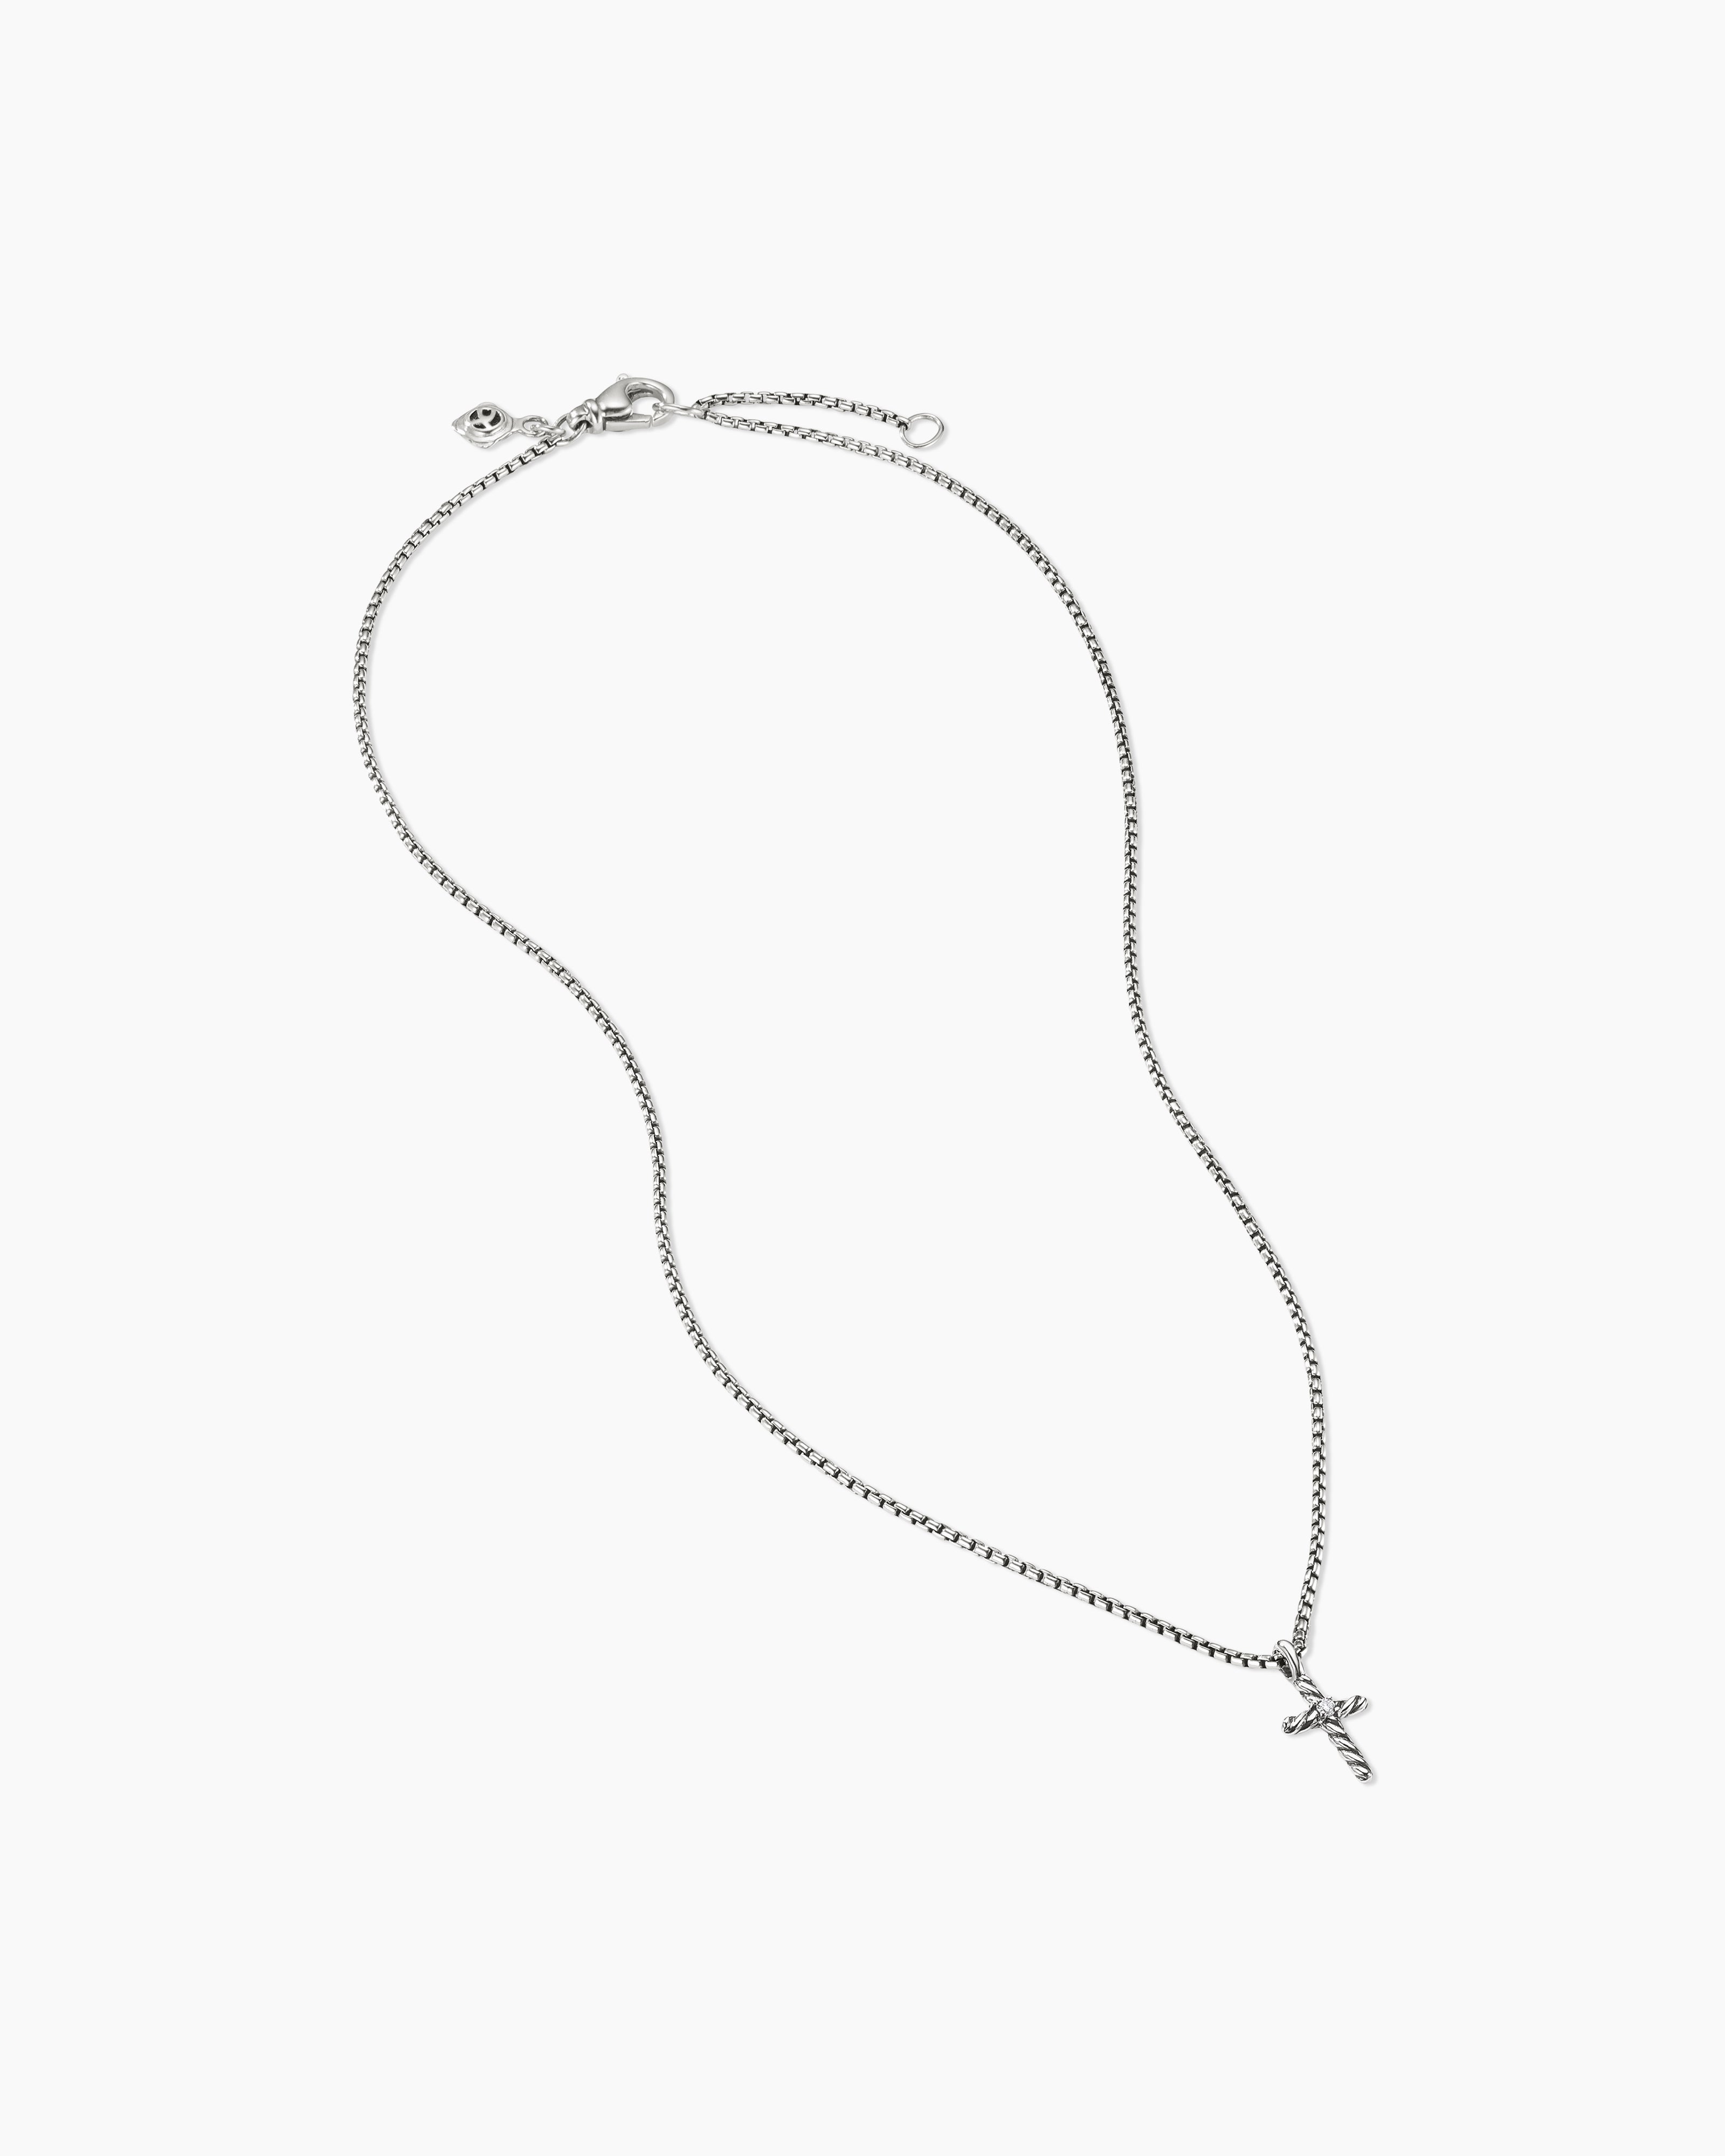 Diamond Cross Necklace | Discover Cross Necklaces for Women - Helzberg